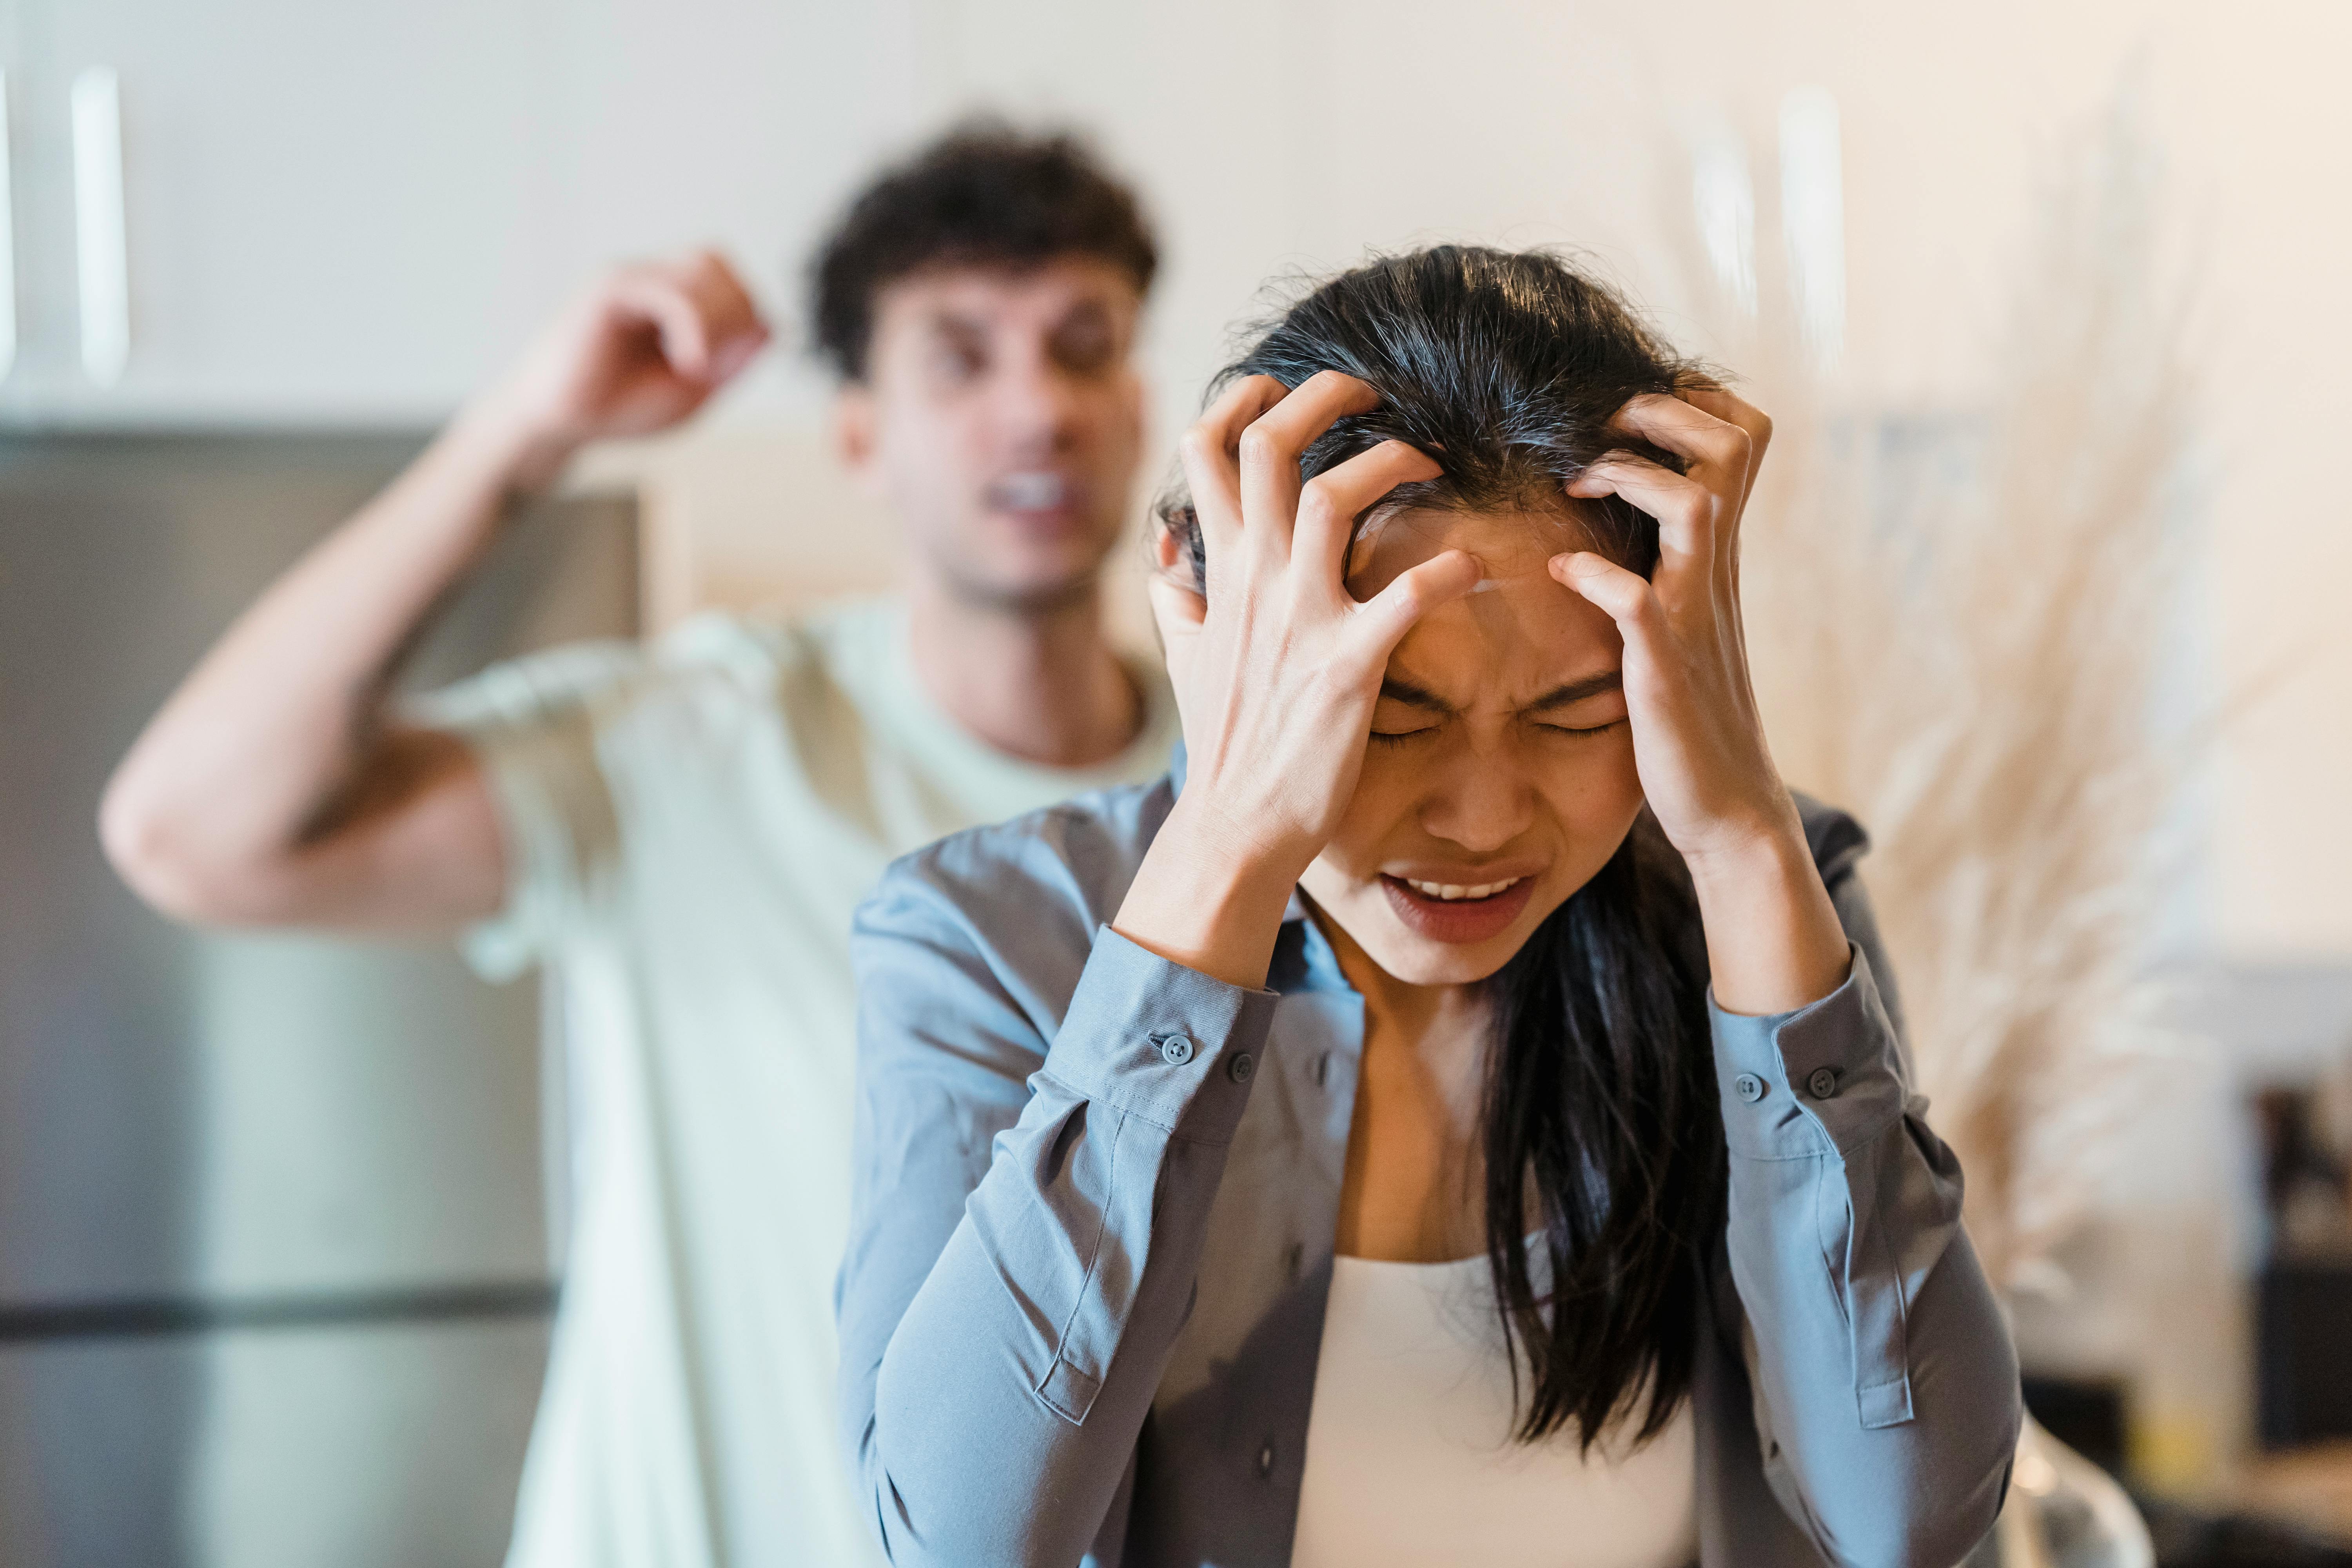 Woman clenches her head | Source: Pexels